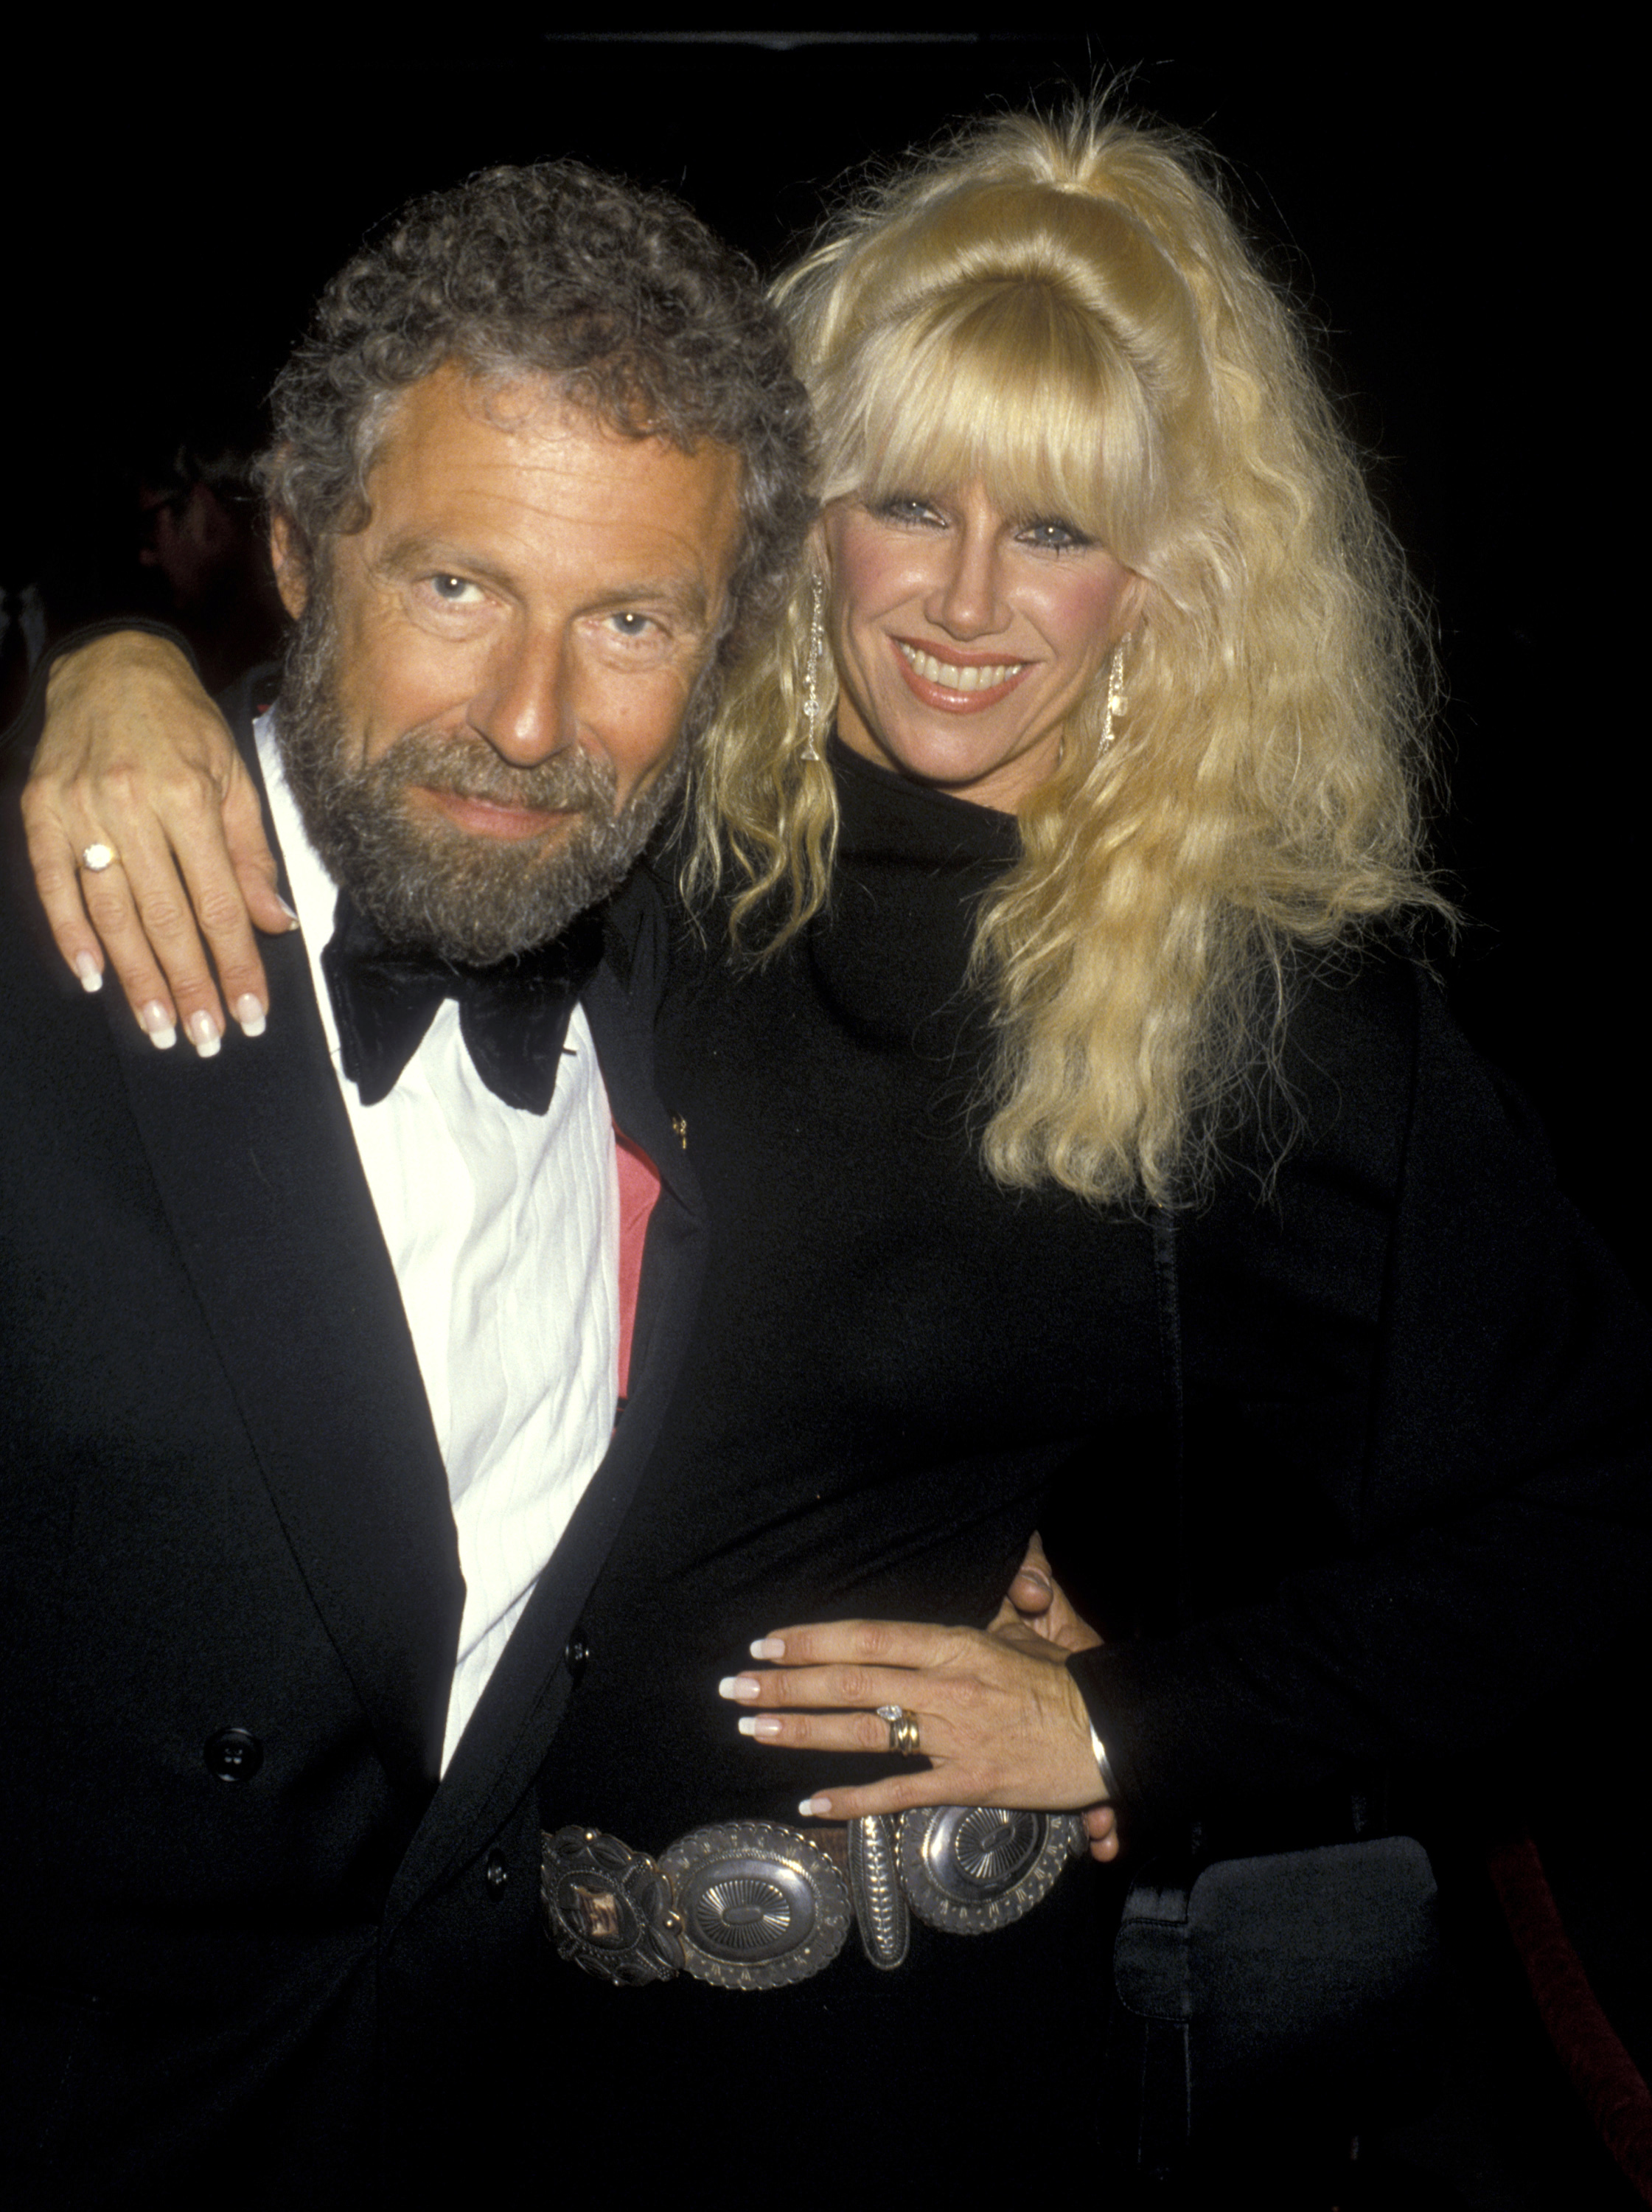 Alan Hamel and Suzanne Somers attend the Barbara Mandrell Post Concert Party at Sheraton Hotel in Los Angeles, California, United States | Source: Getty Images